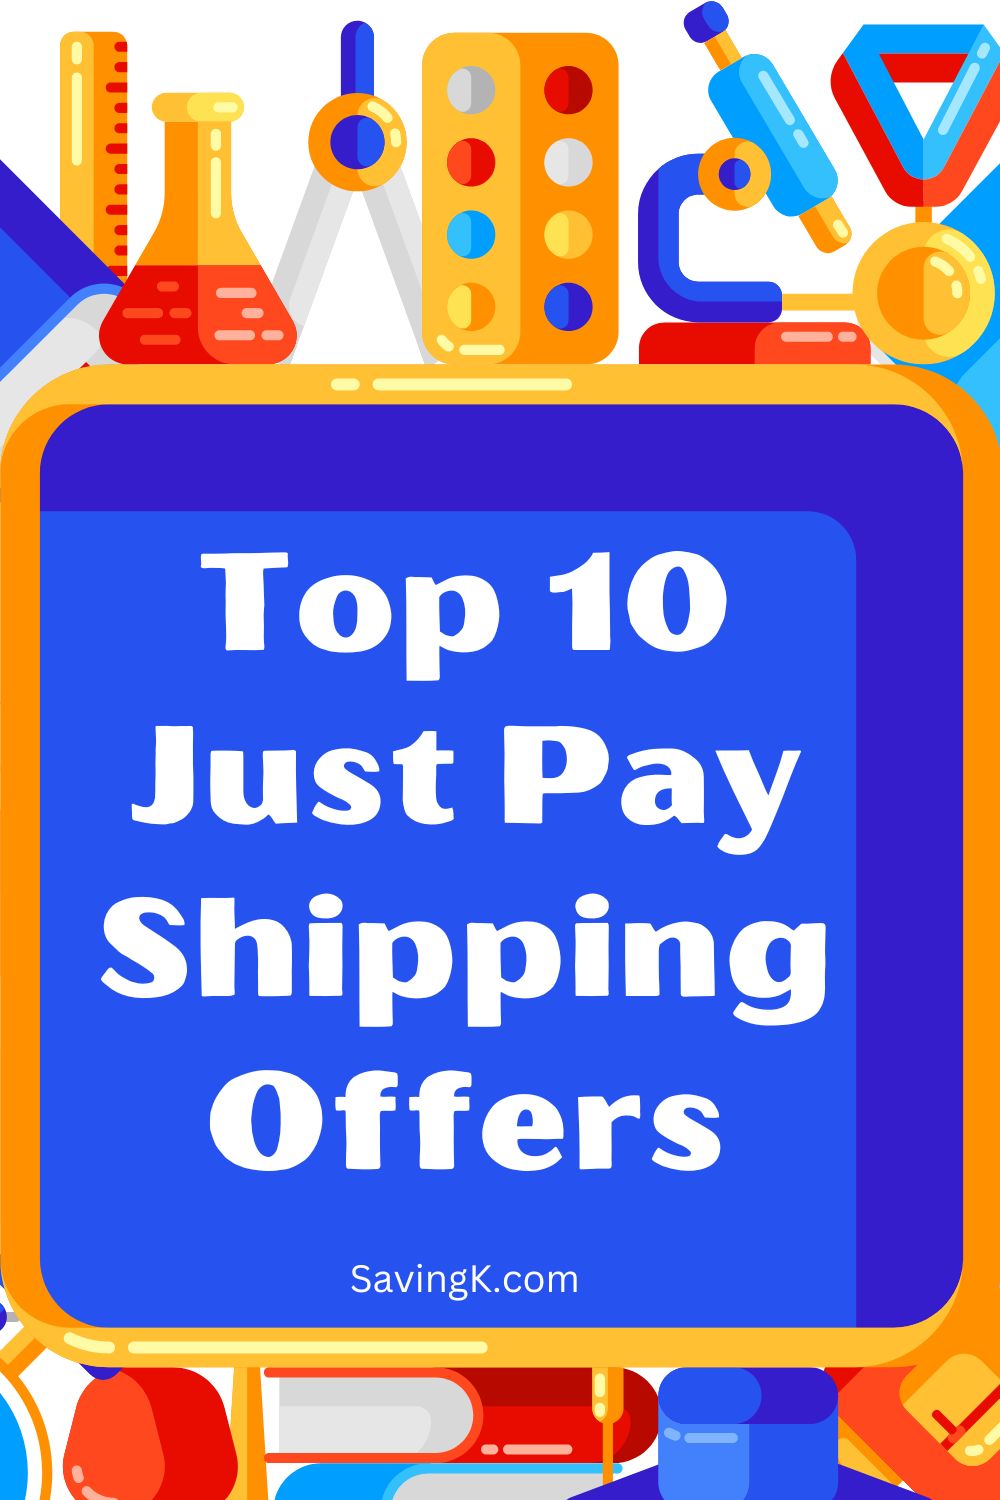 Top 10 Just Pay Shipping Offers